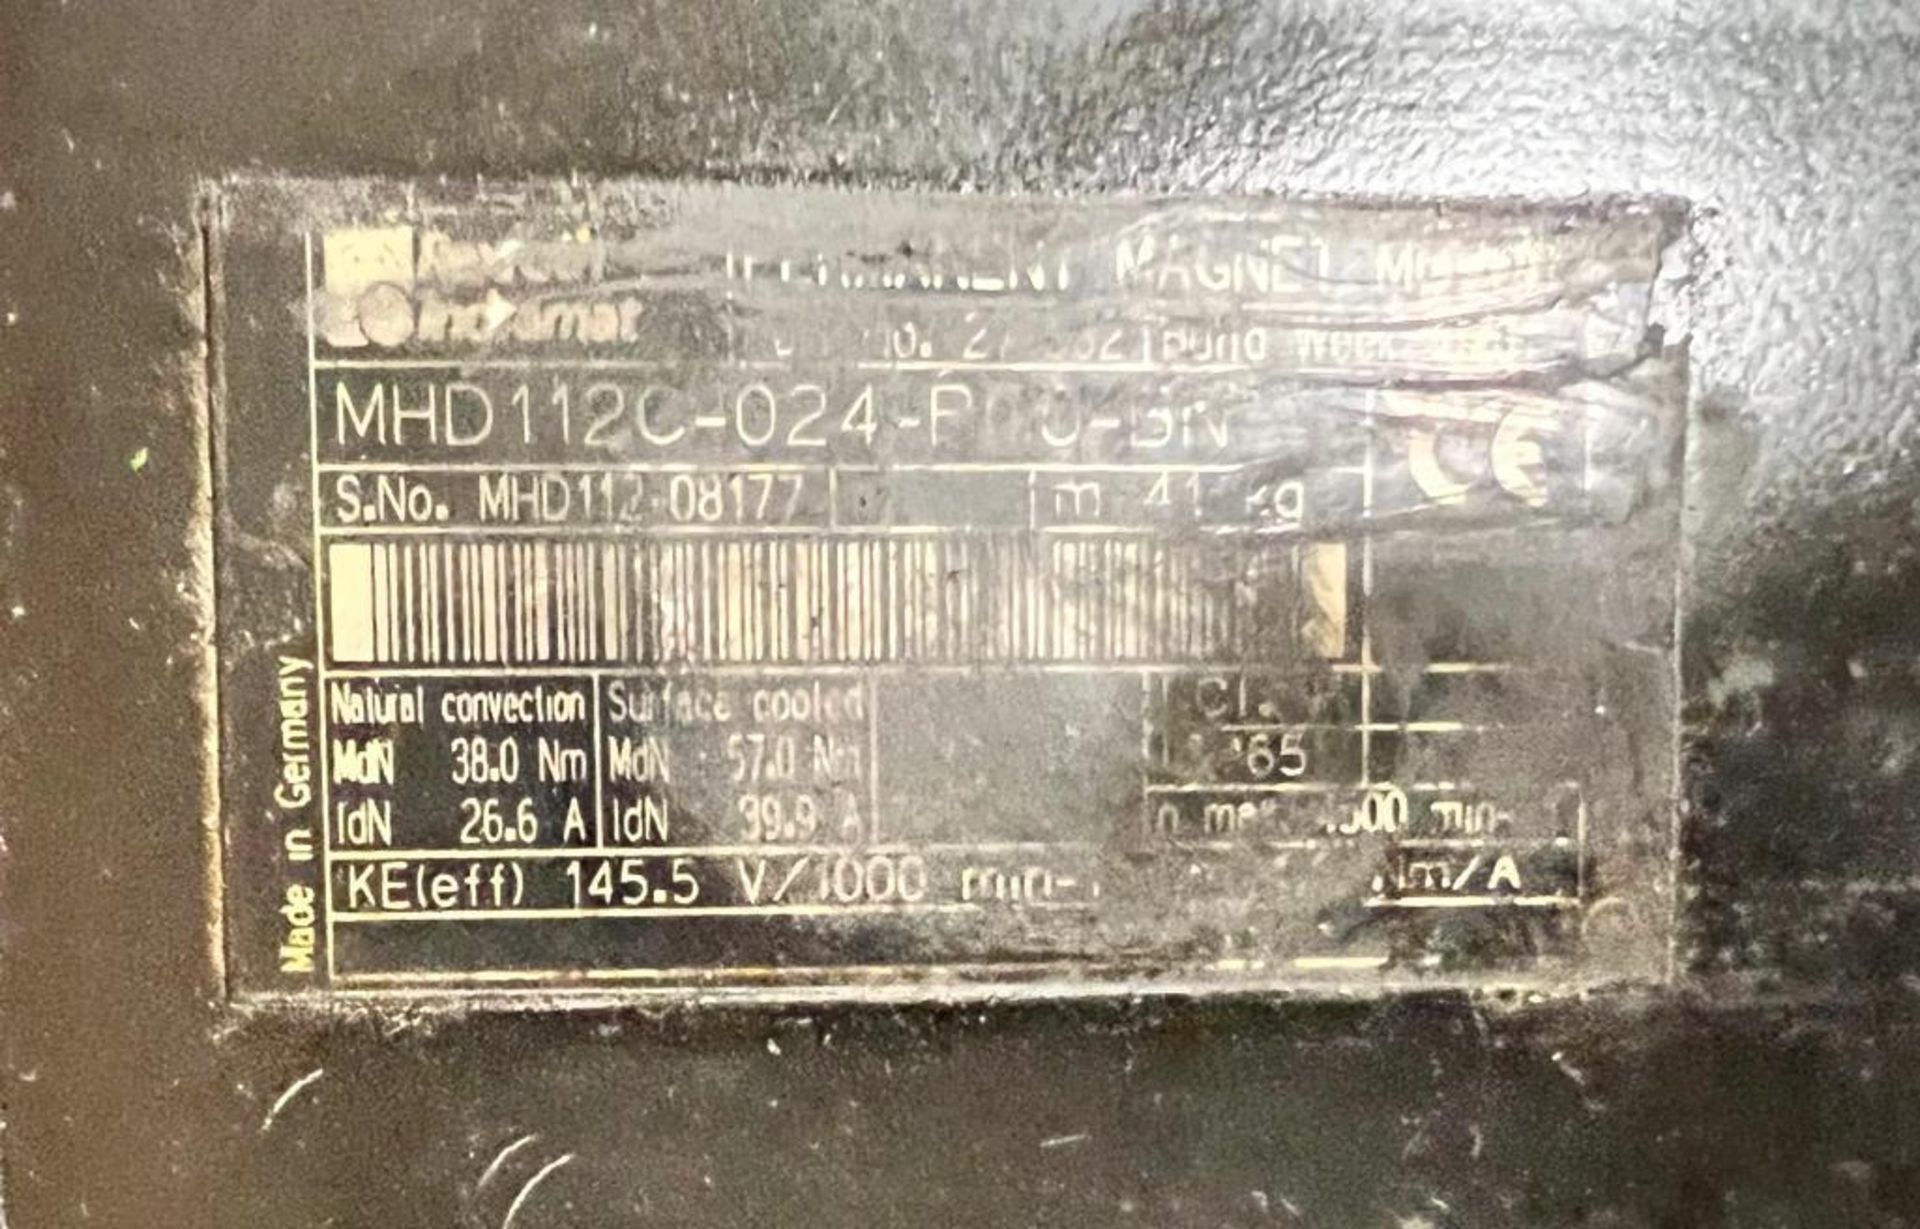 REXROTH INDRAMAT, MHD112C-024-PG0-BN, 4500 RPM, 145.5V - Image 3 of 3